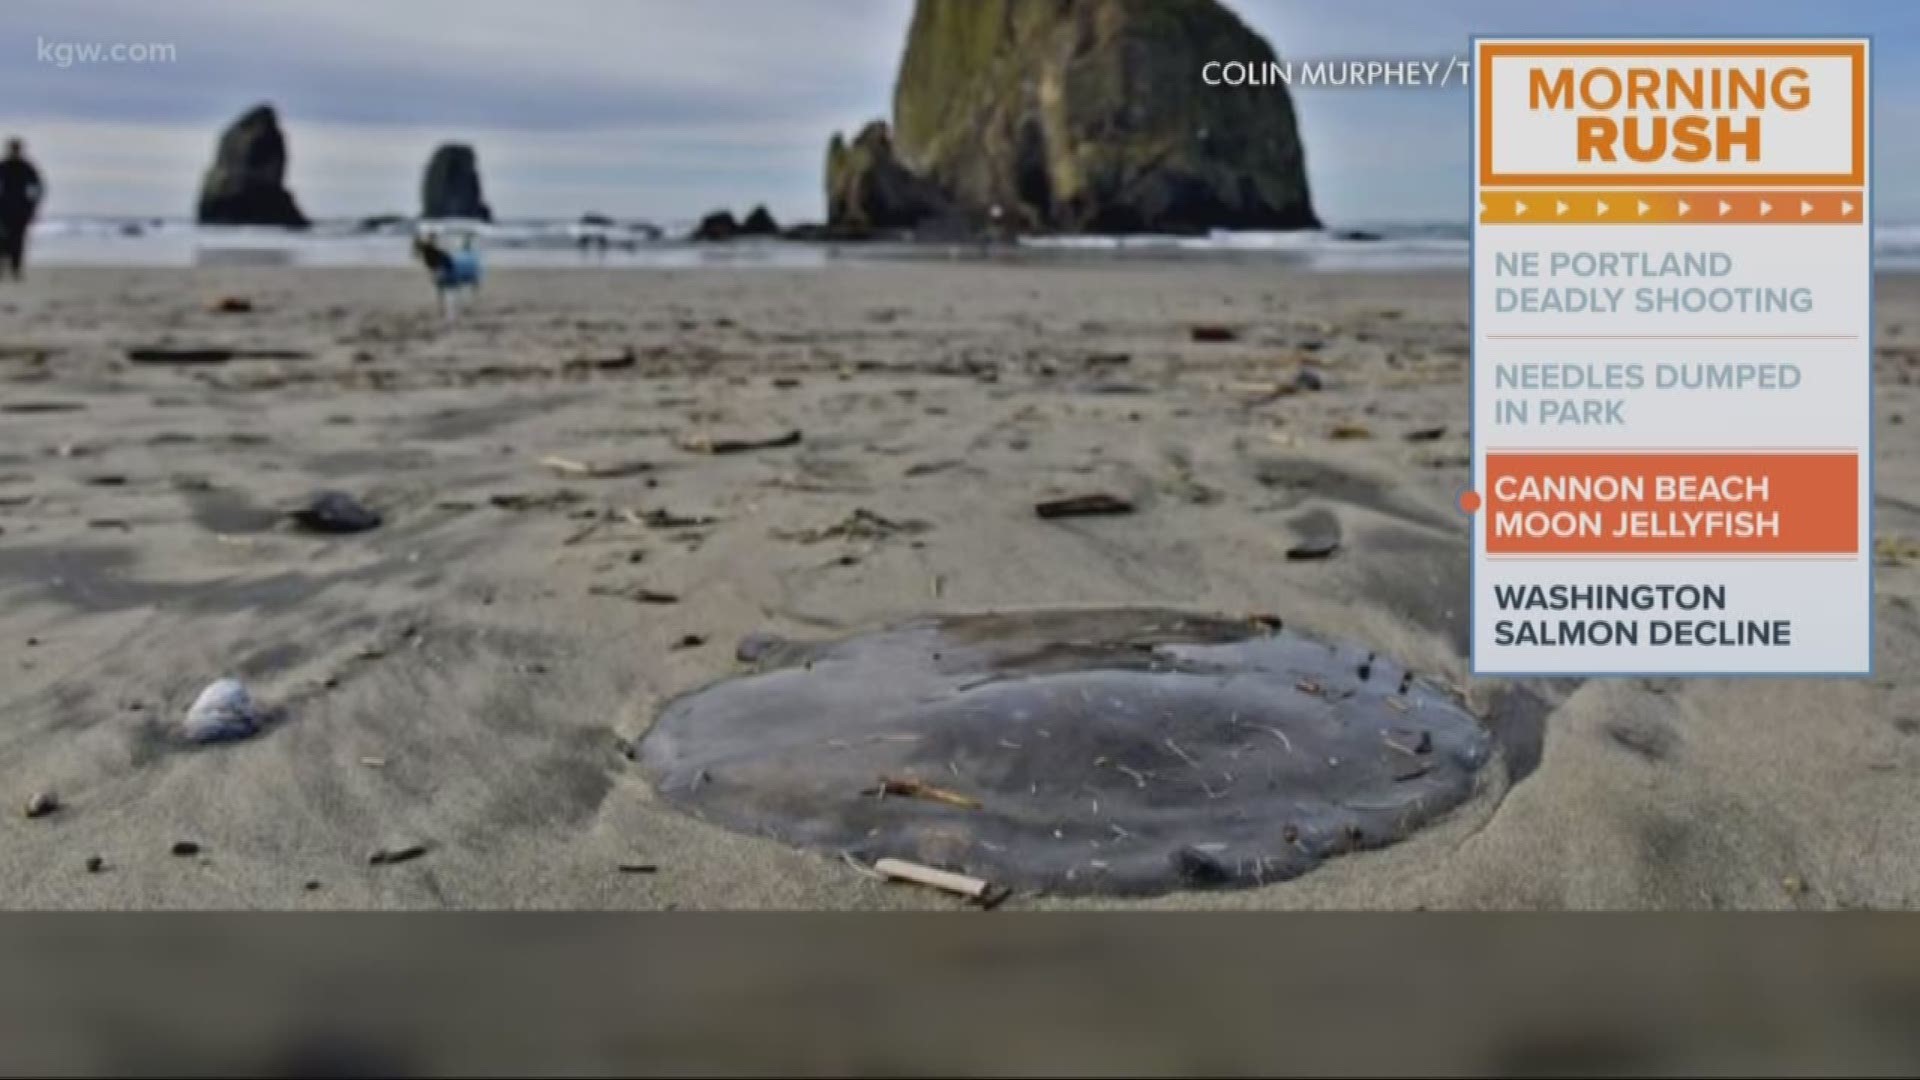 Jellyfish have washed up on shore in Cannon Beach.